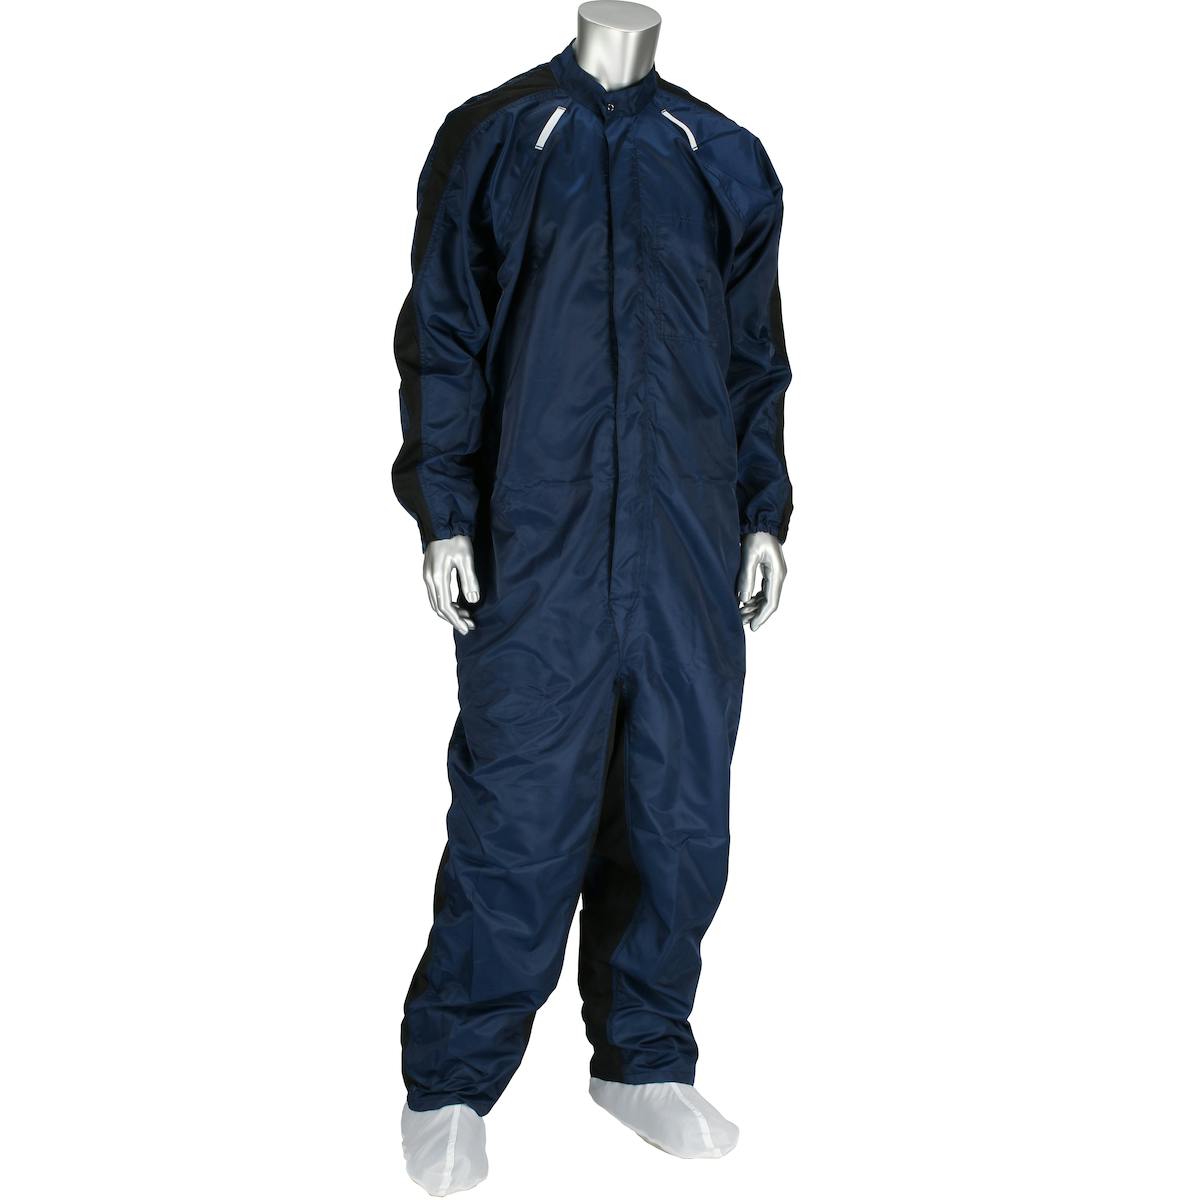 Auto Grid  Paint / Powder Coating Coverall, Navy (CCNCHR-62NV-5PK)